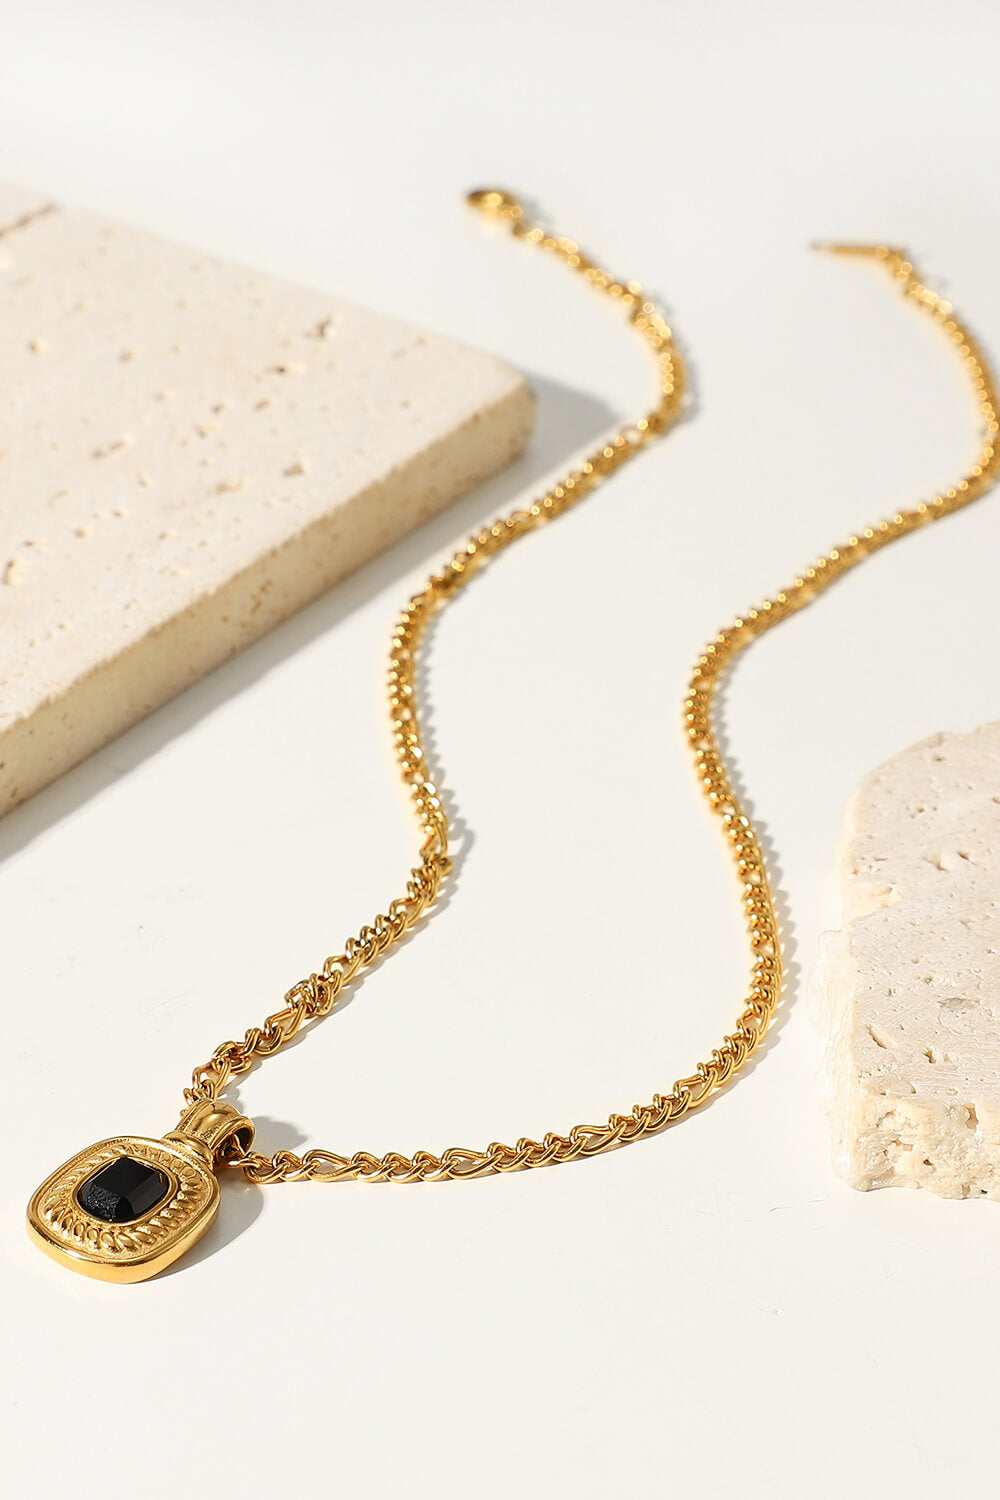 Villa Blvd 18K Gold Plated Jeweled Pendant Necklace ☛ Multiple Colors Available ☚